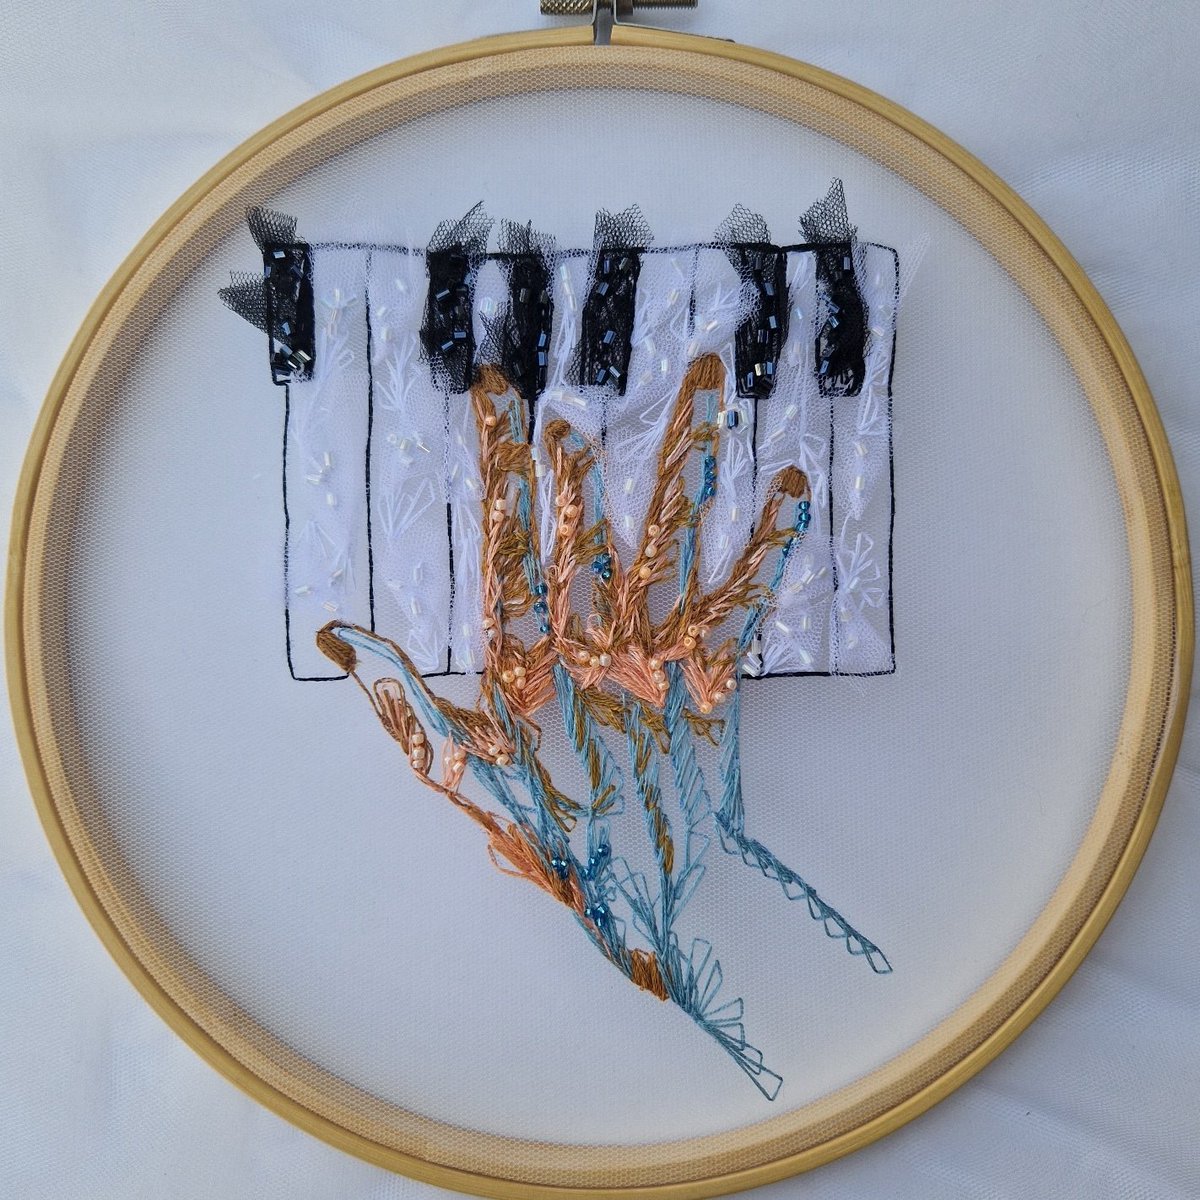 Playing the piano 🎹 ✨️ 🩵 

#thrillofthread #embroidery #tulleart #latemodernism #thread #stitch #hoopart #art #abstractism #PopArt #tulle #handart #hand #embroideryontulle #tulleembroidery #hands #abstractlineart